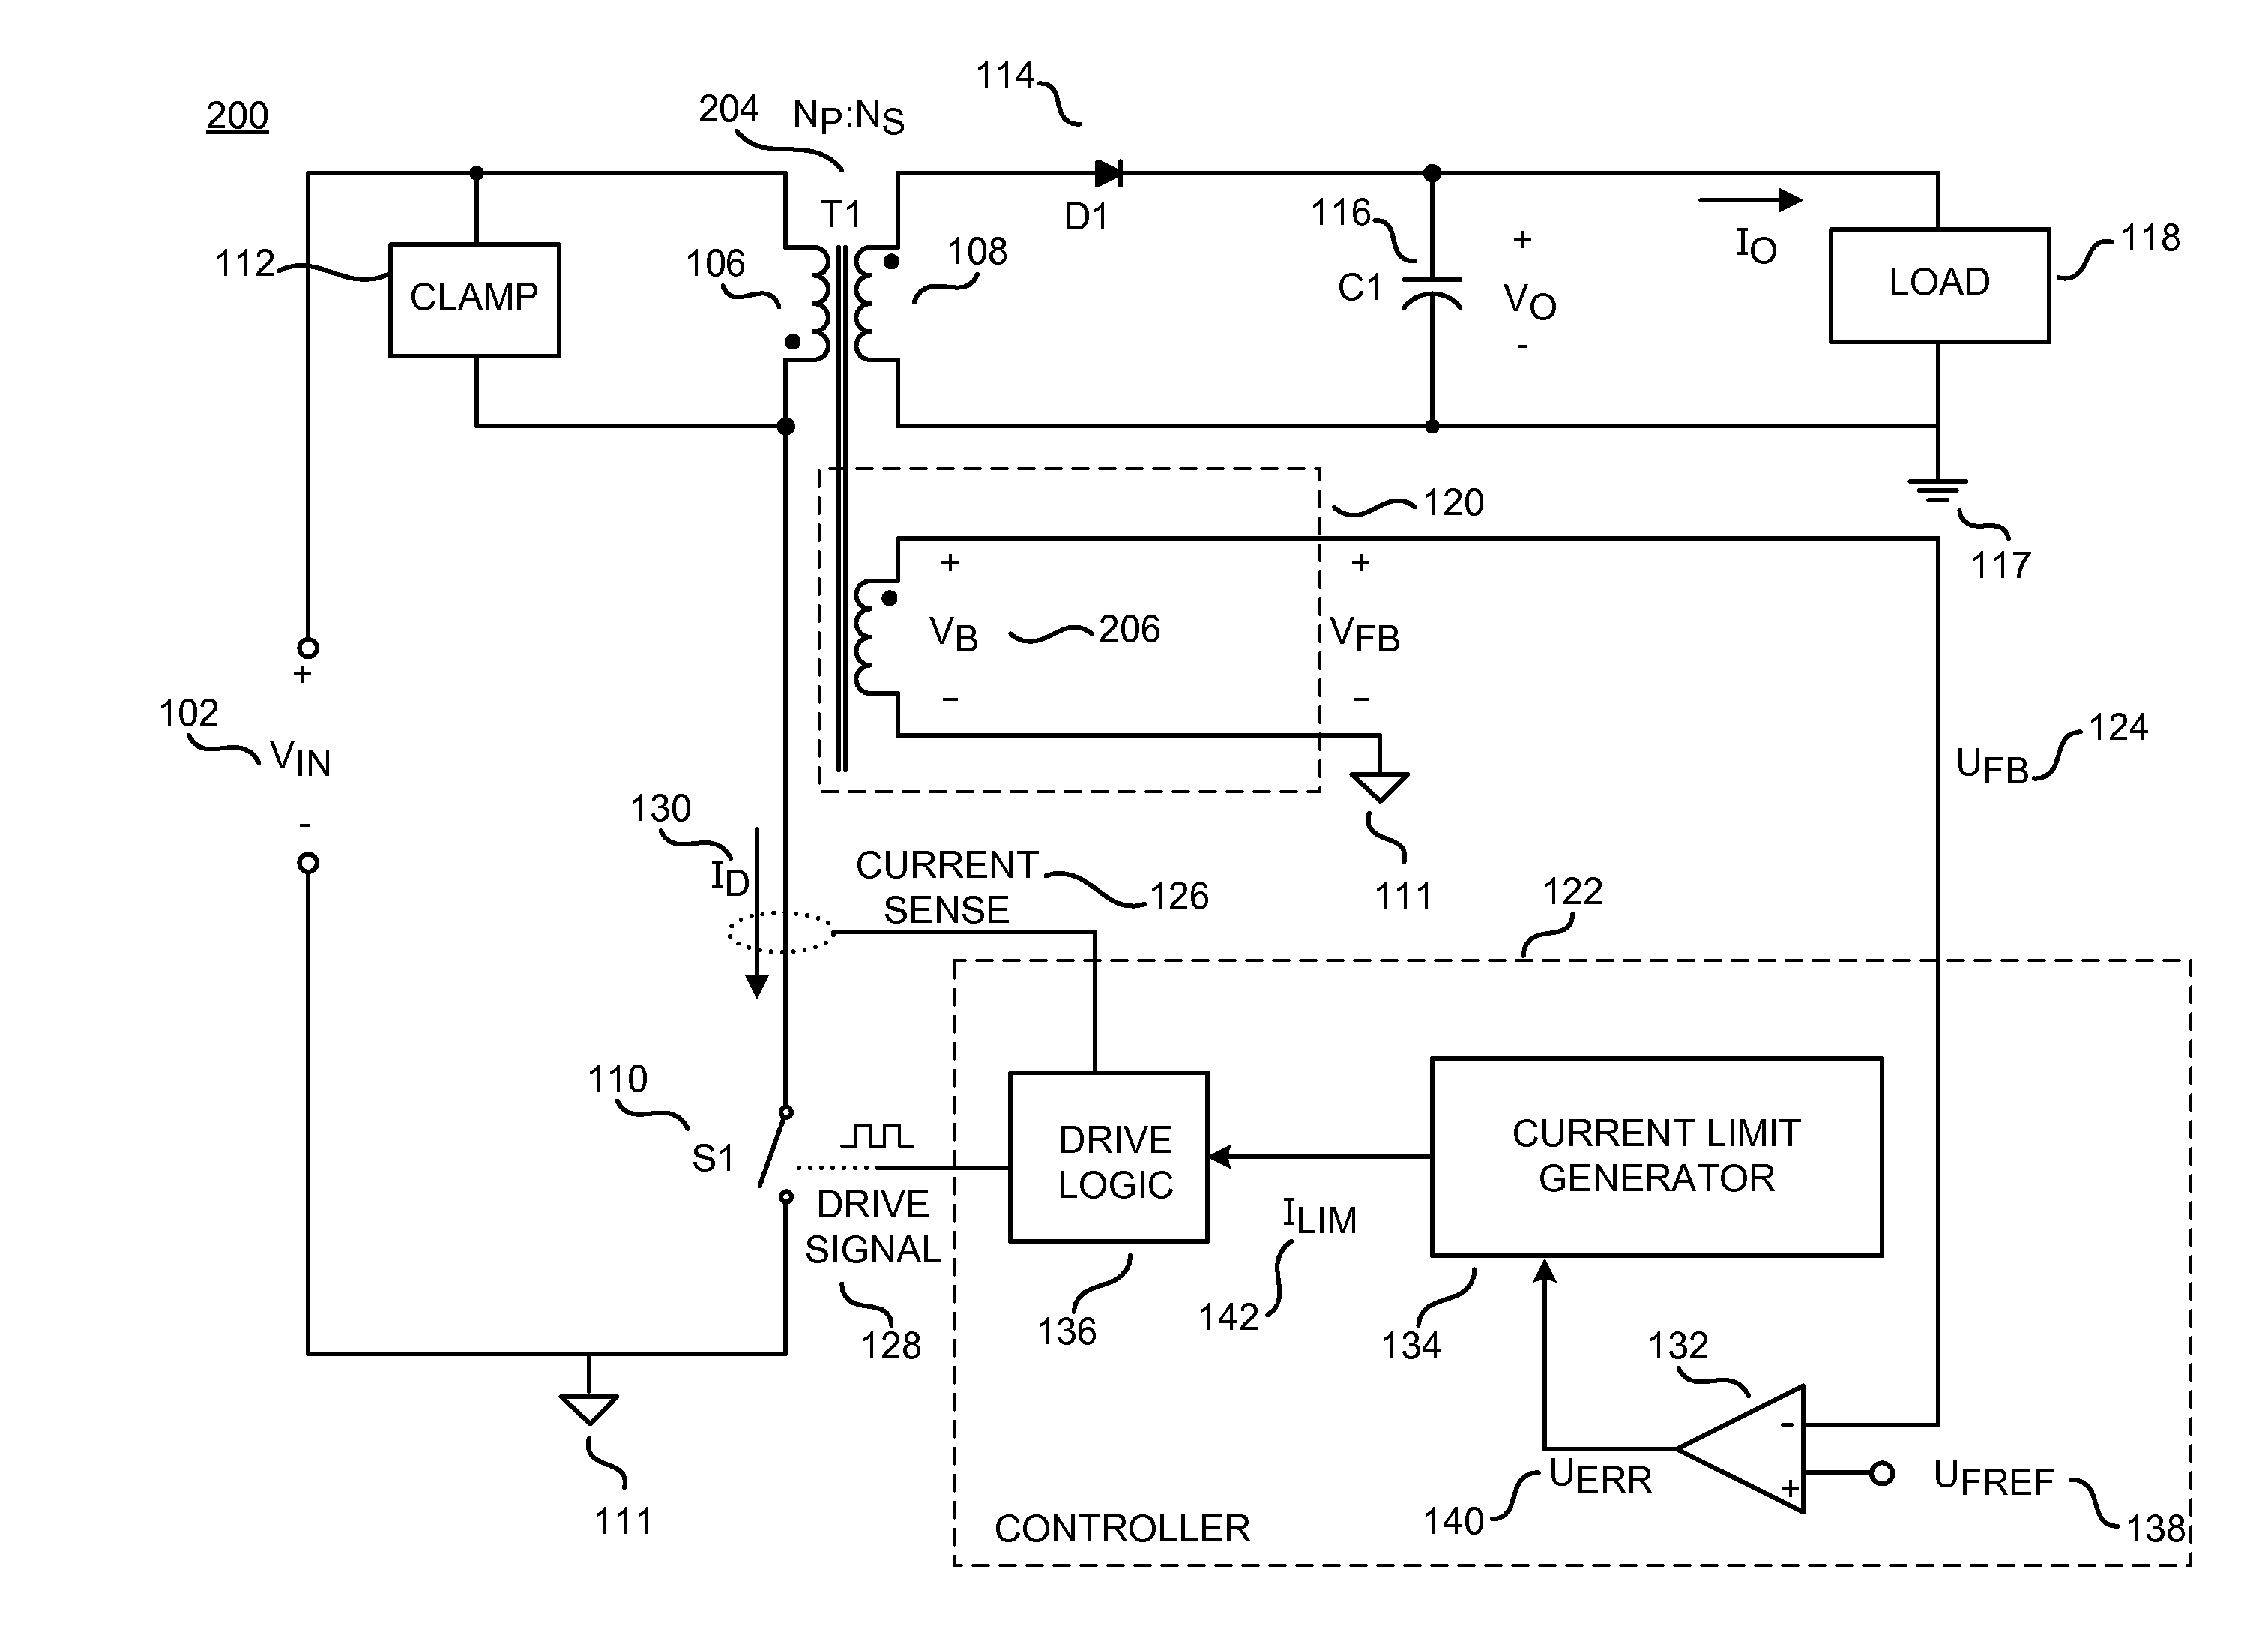 Controller with constant current limit